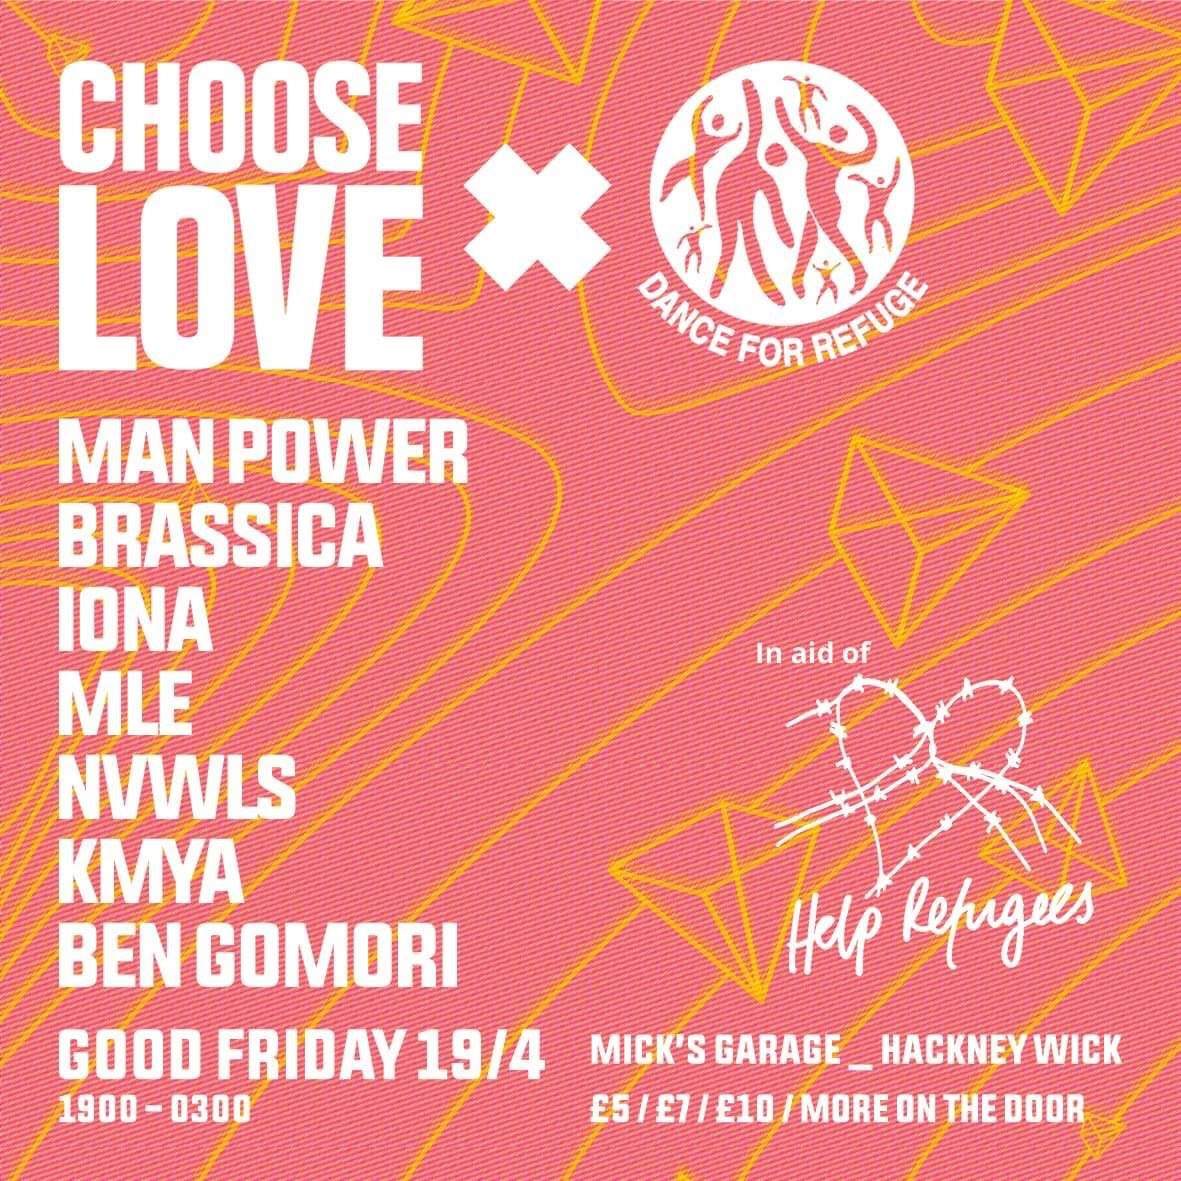 Choose Love x Dance For Refuge with Man Power, Brassica, Iona & More - フライヤー表